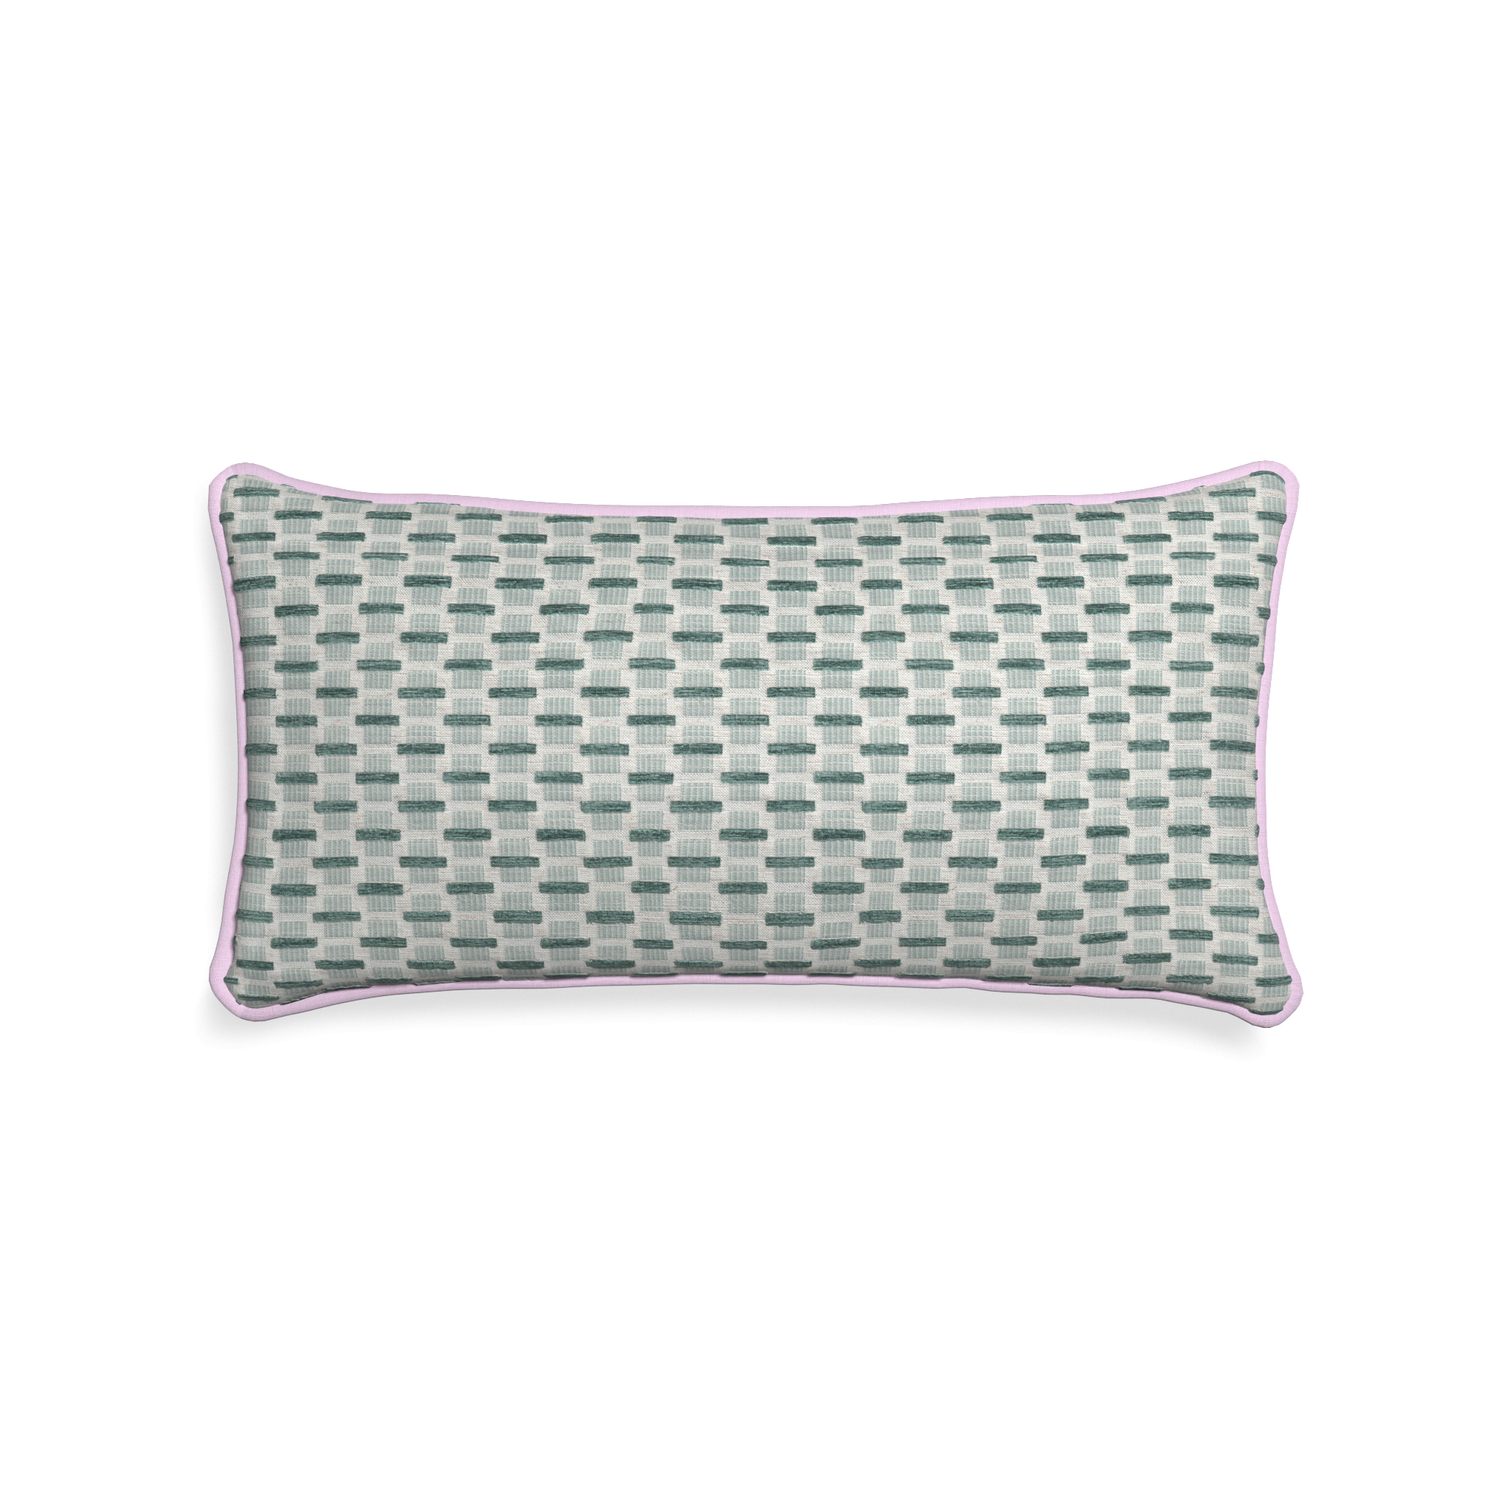 Midi-lumbar willow mint custom green geometric chenillepillow with l piping on white background